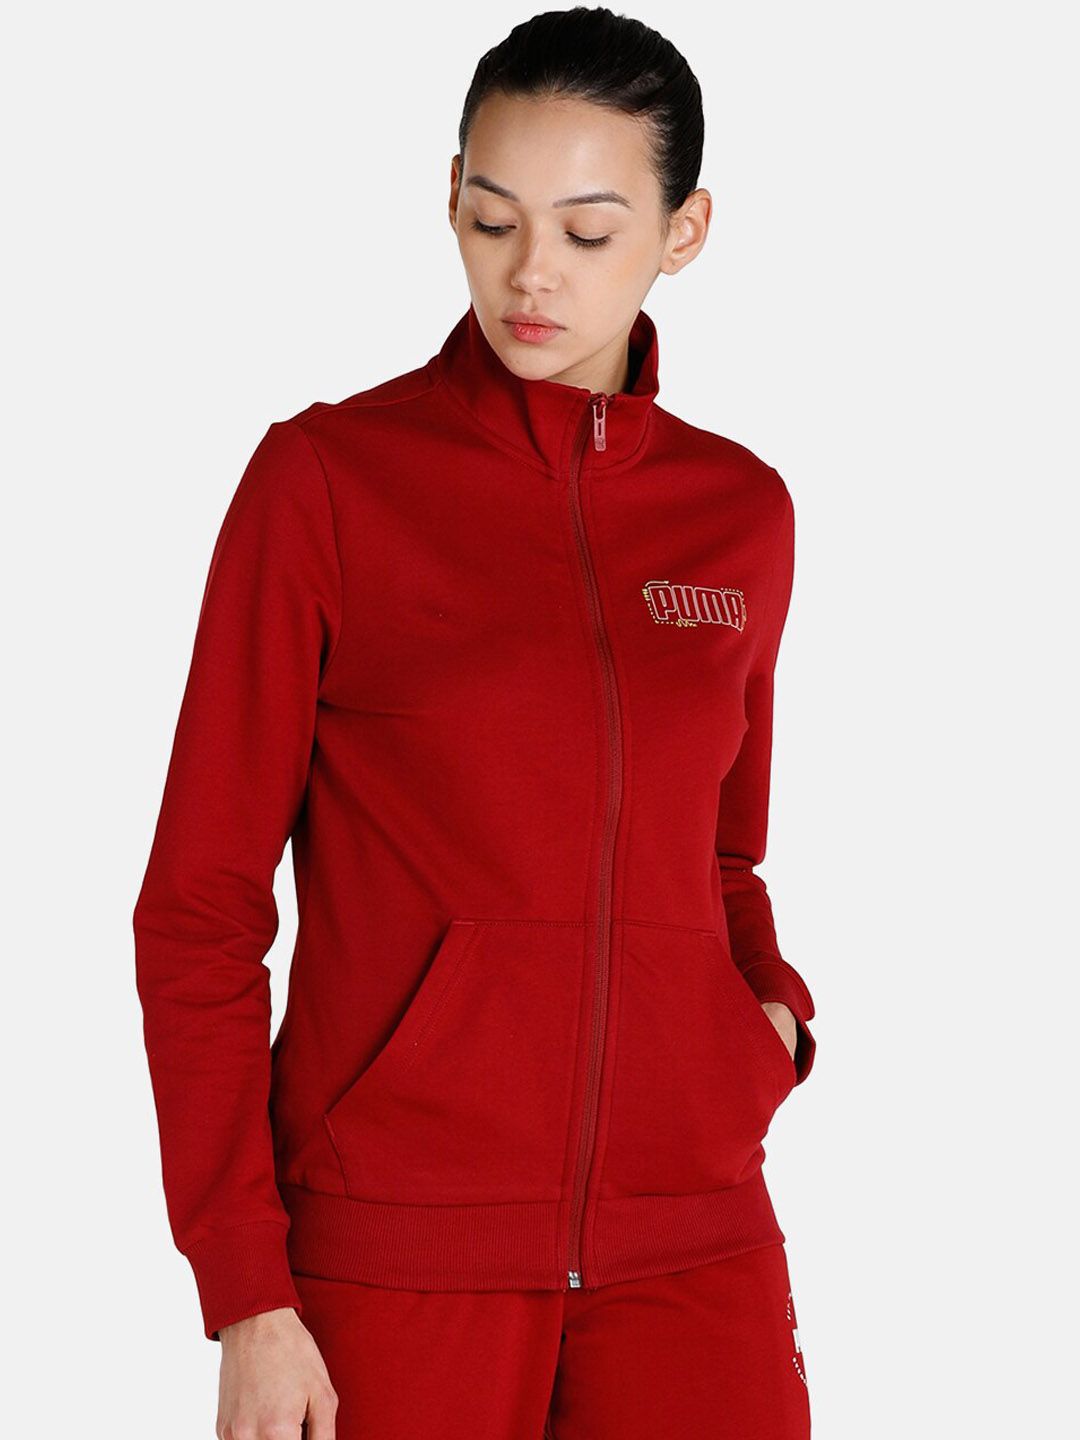 Puma Women Red Cotton Sporty Jacket Price in India